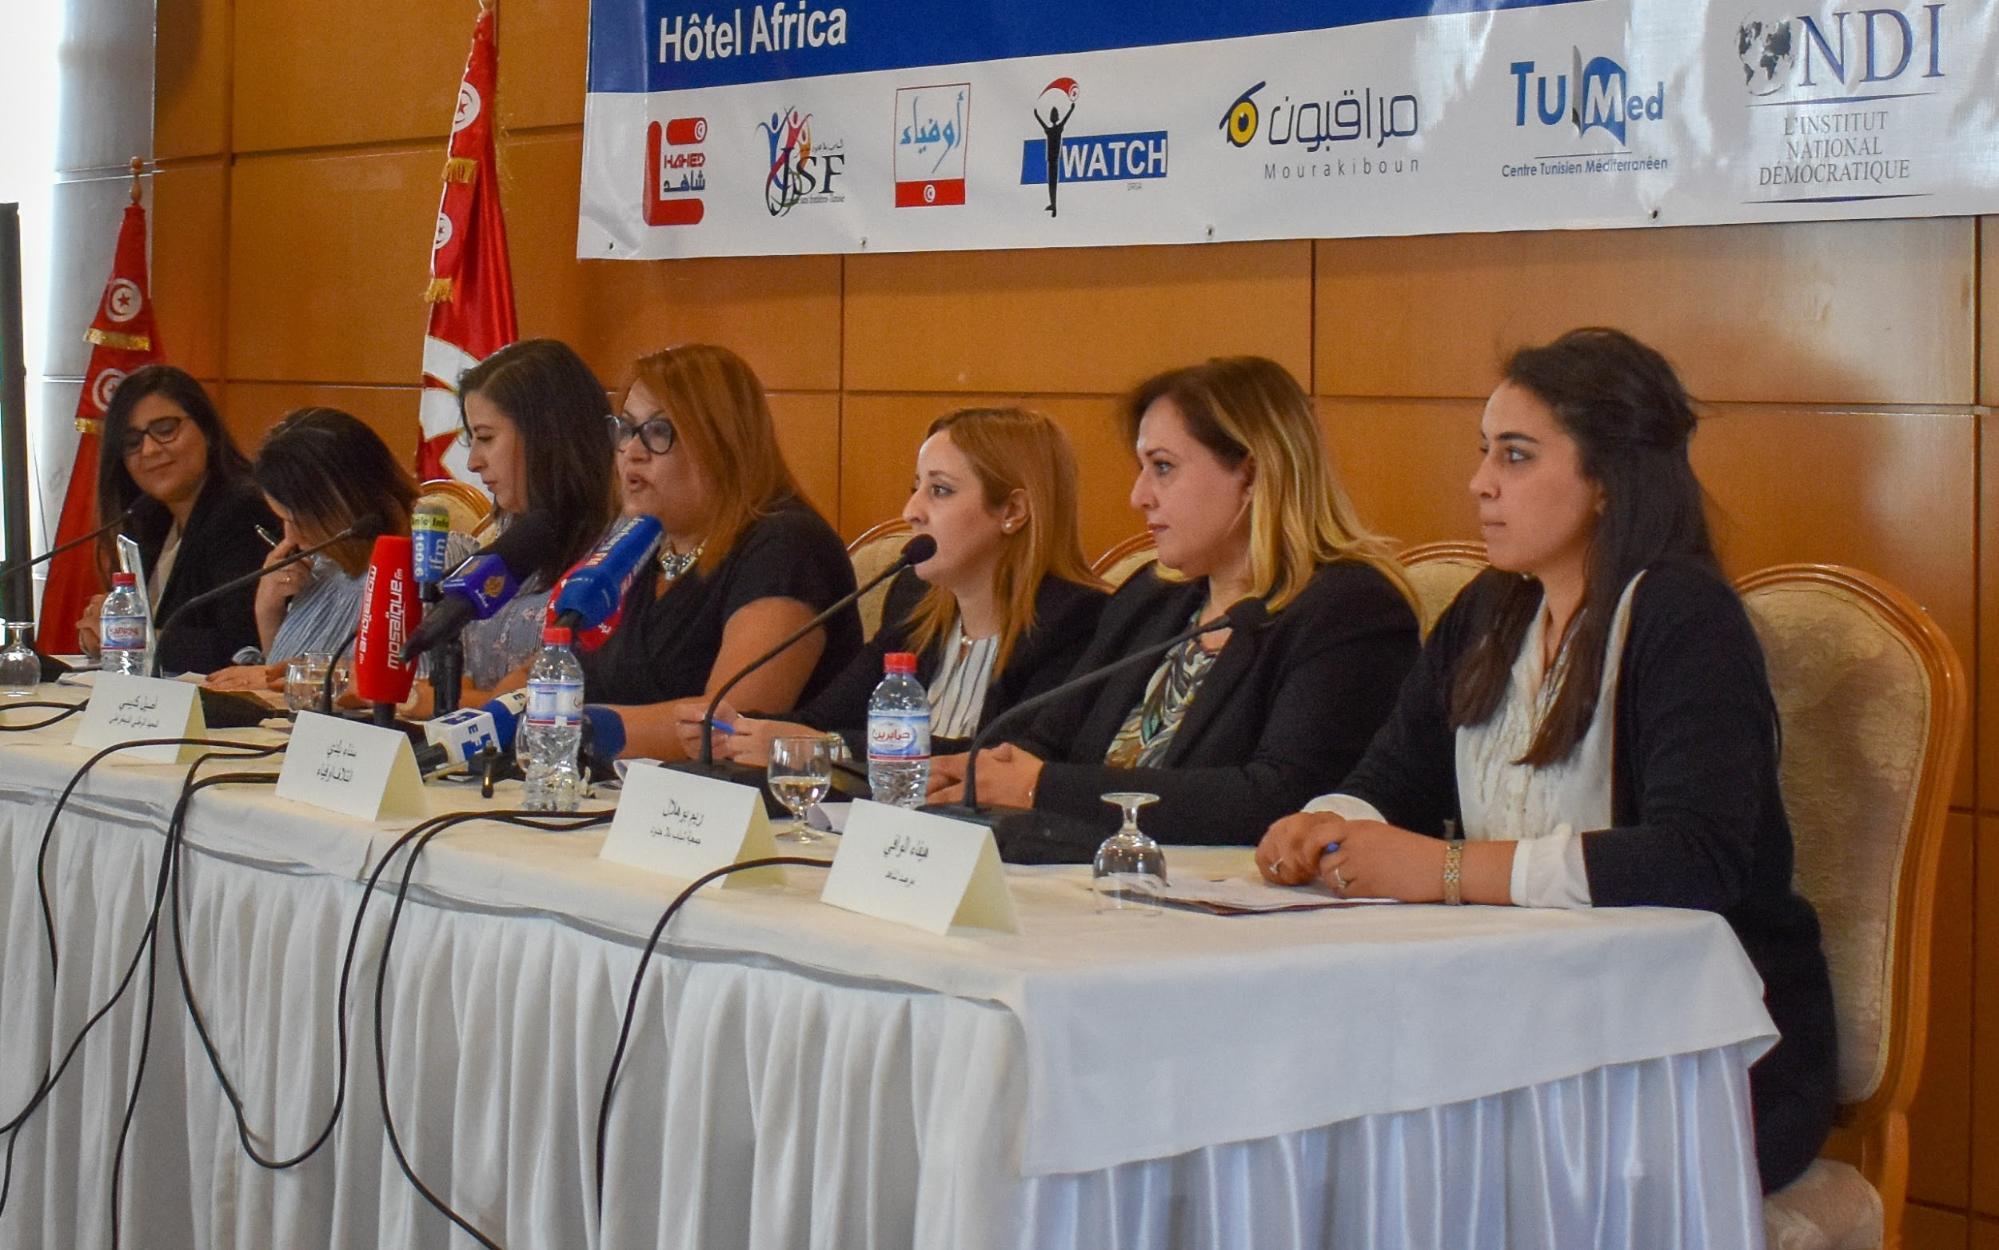 Representatives from six Tunisian election observation groups deliver findings and recommendations following the May 6, 2018, municipal elections.